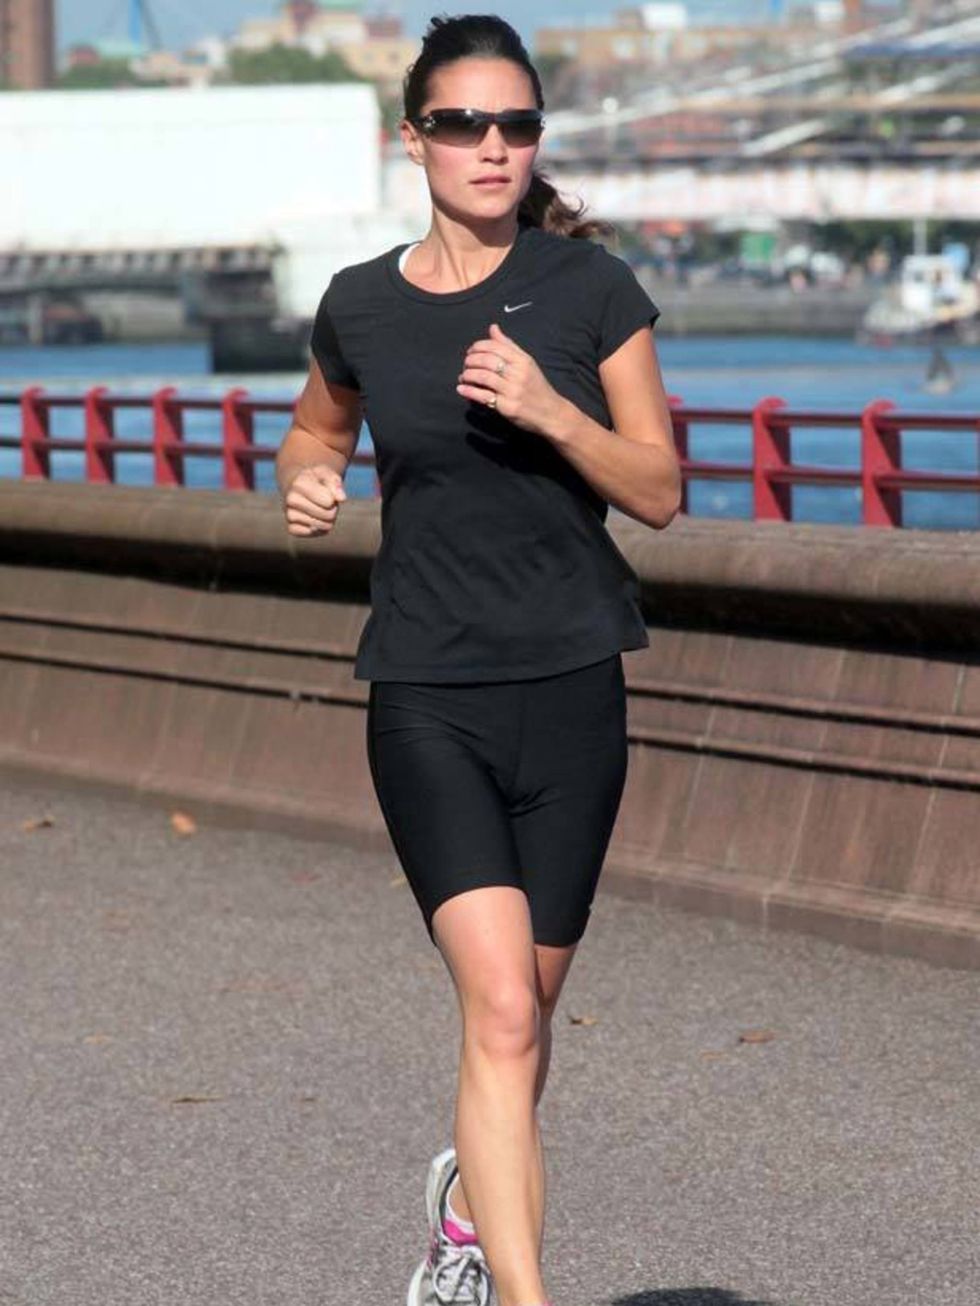 <p>Pippa works hard to maintain that envy-inducing bum. The world's most famous sister is super fit, regularly partaking in triathlons, yikes! The three discipline event combines swimming, cycling and running for a hard, all-over workout. She's a regular 